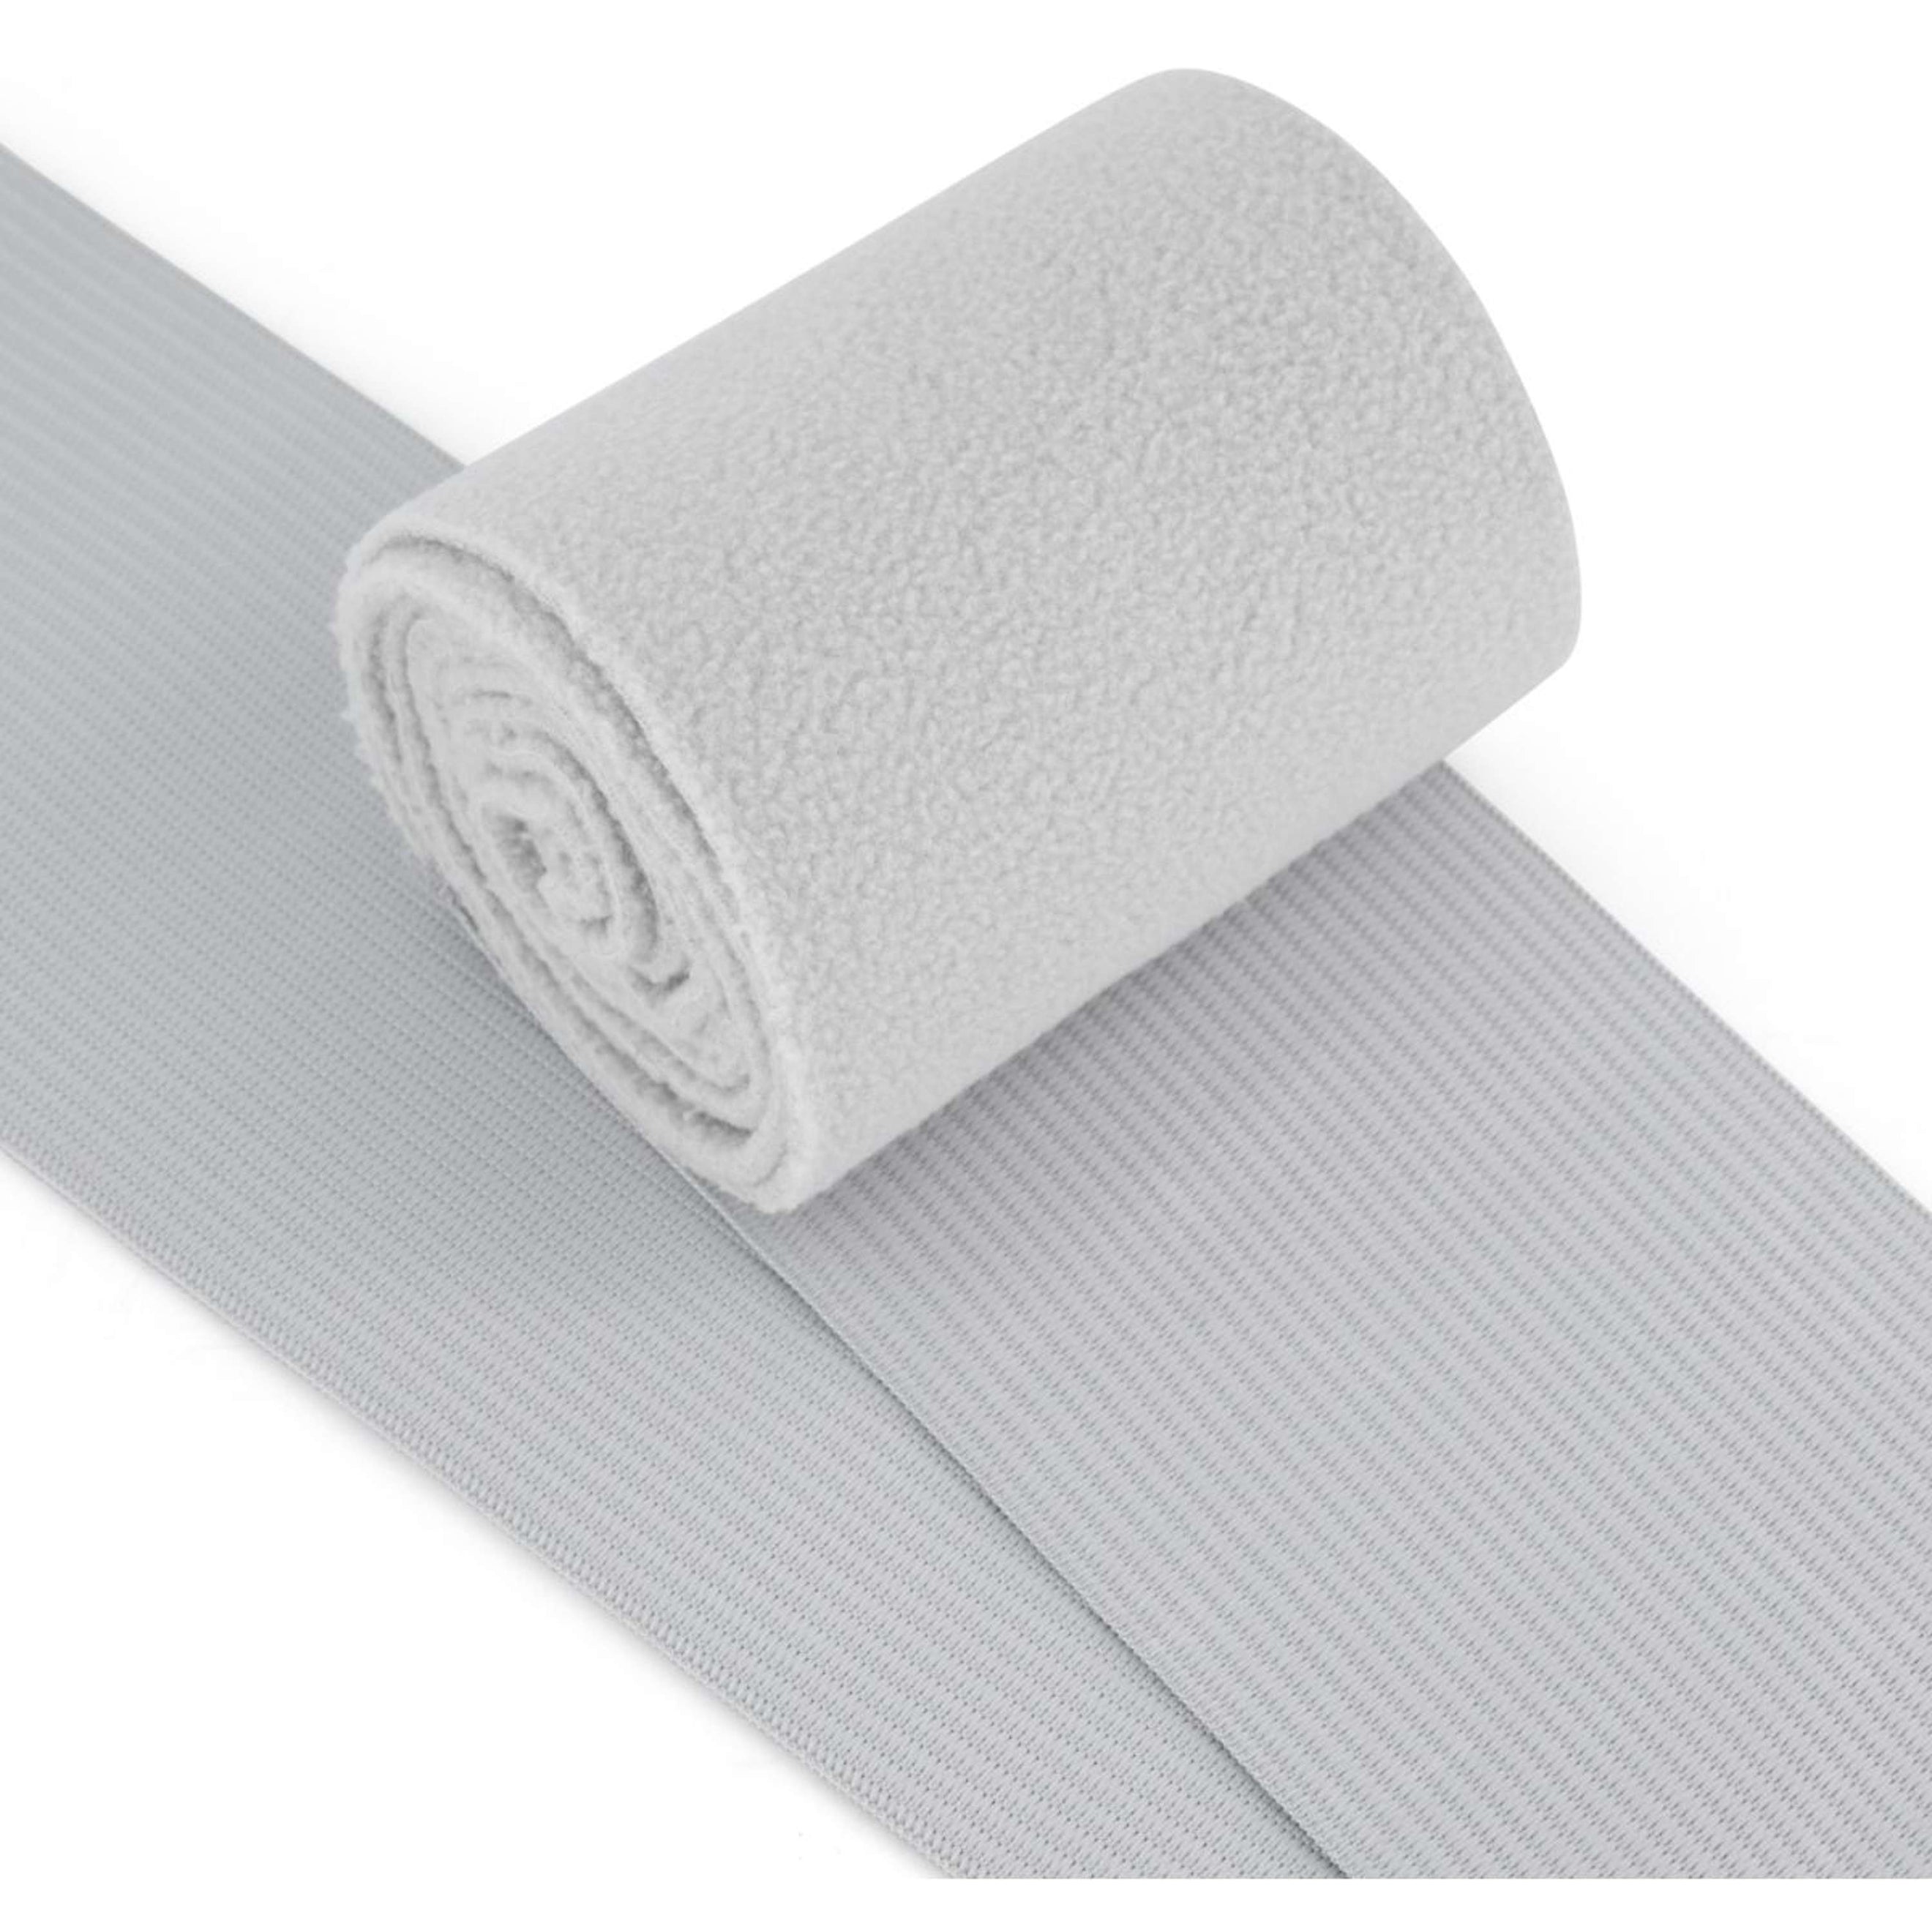 Mrs. Ros Bandages Technical Oyster Grey